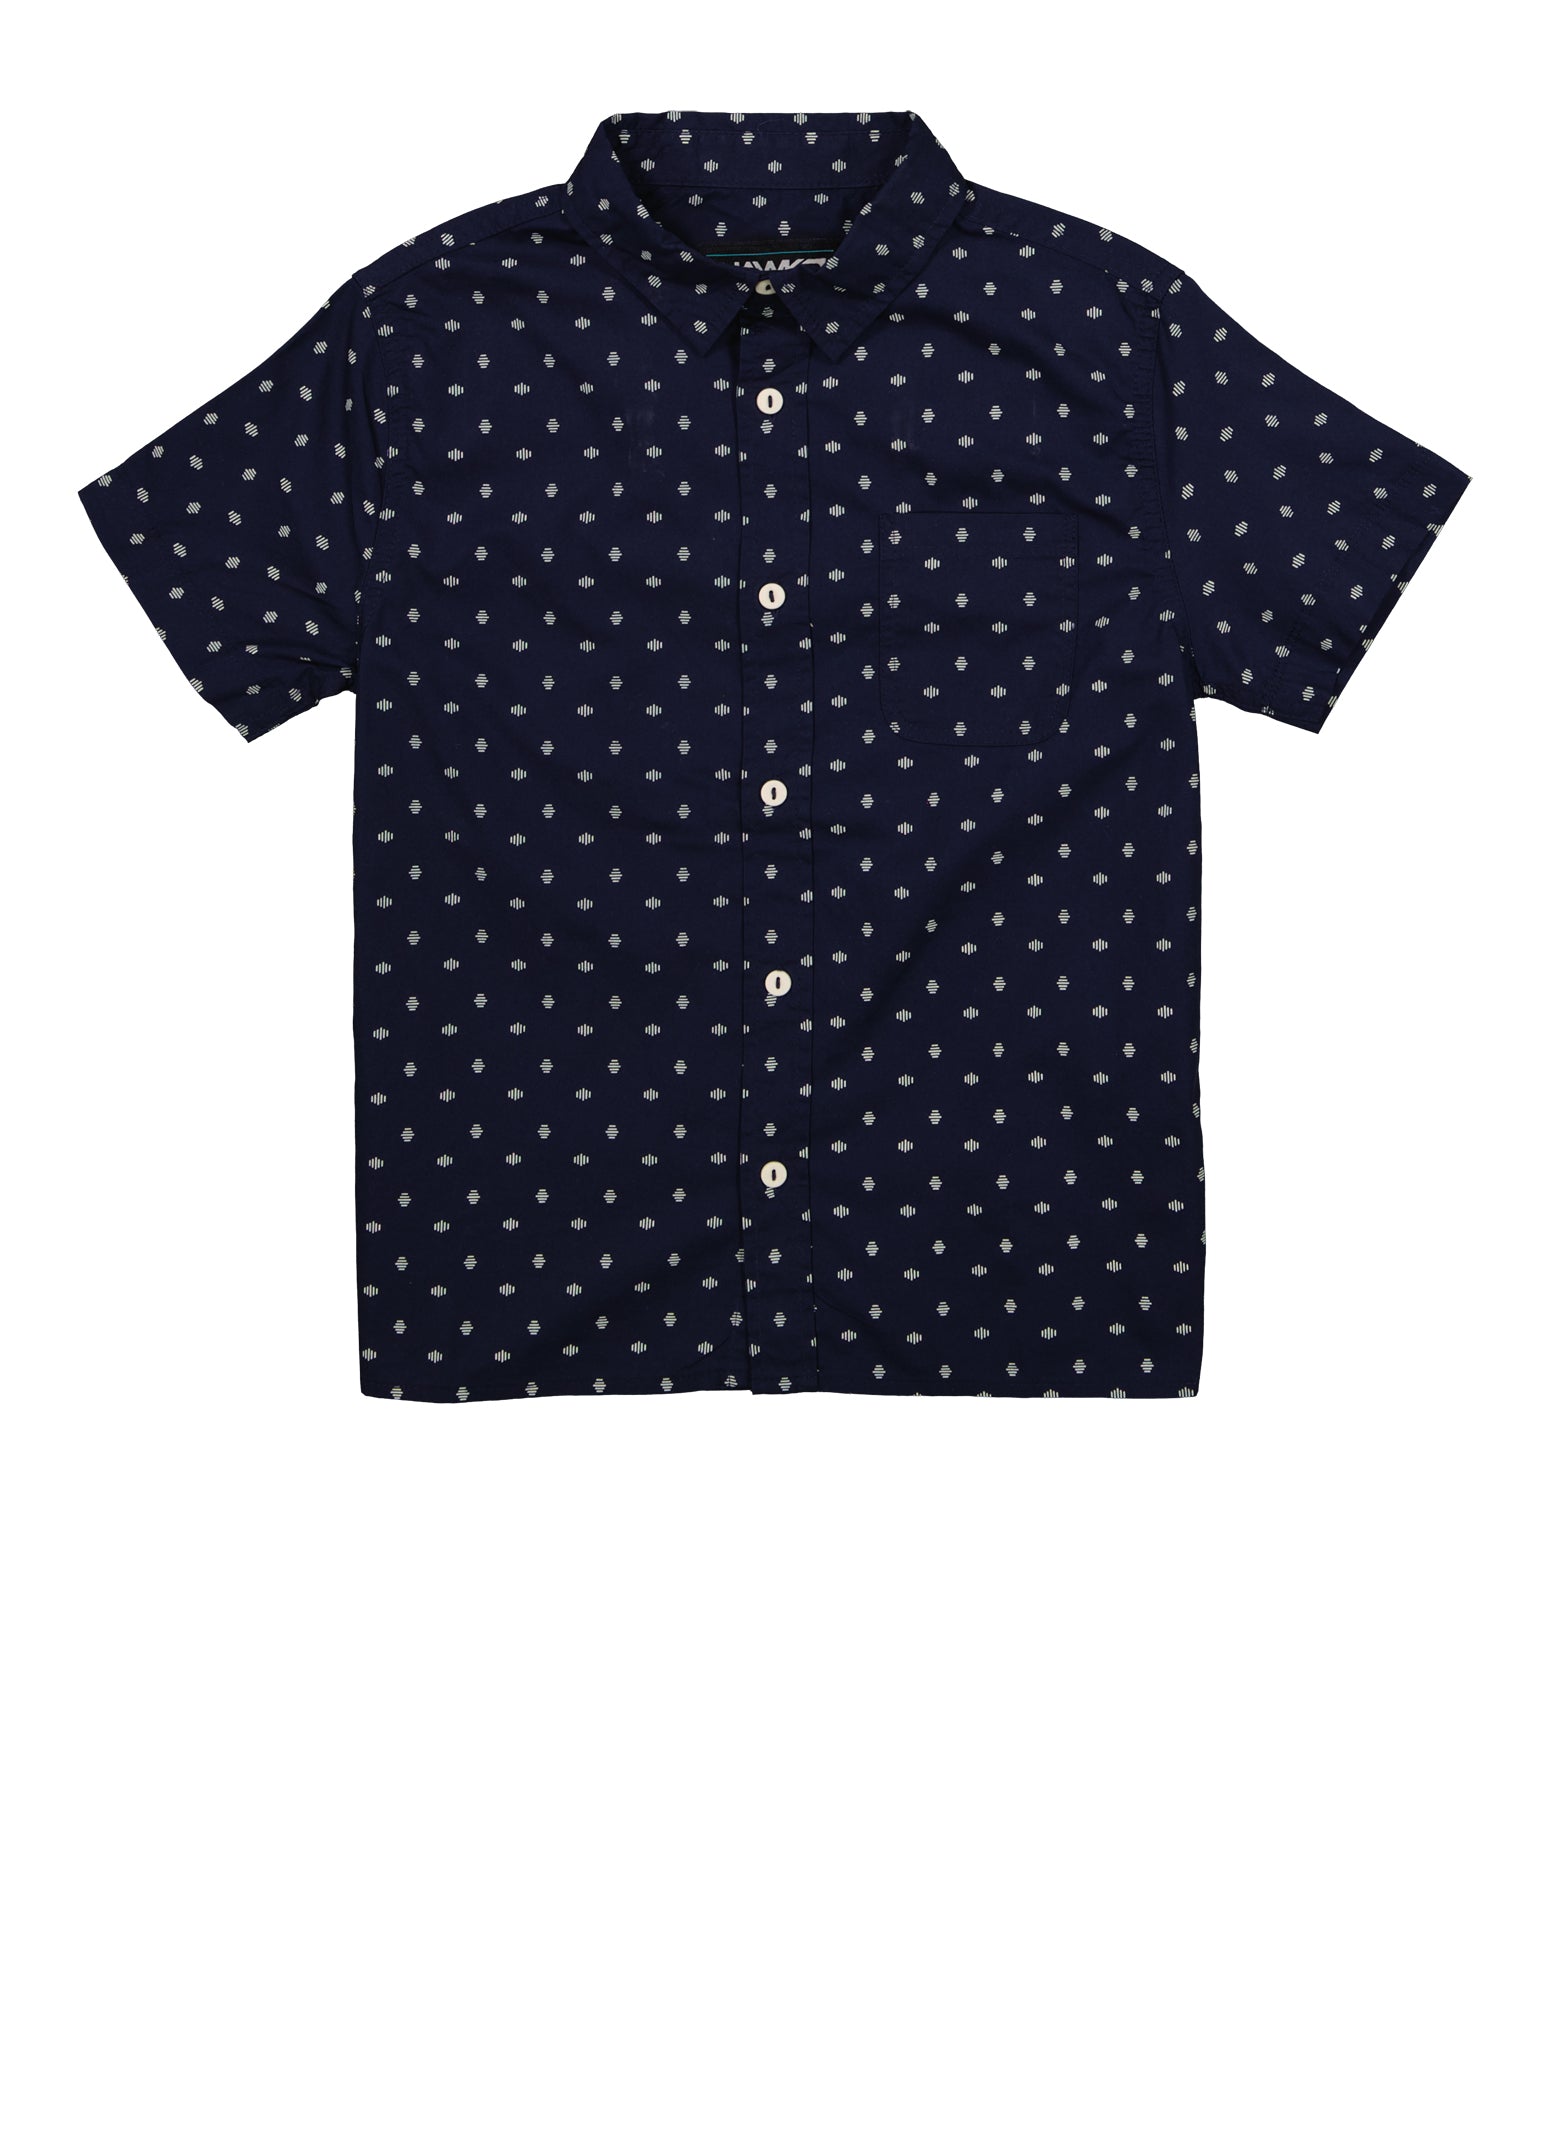 Boys Patterned Button Front Shirt, Blue, Size 10-12